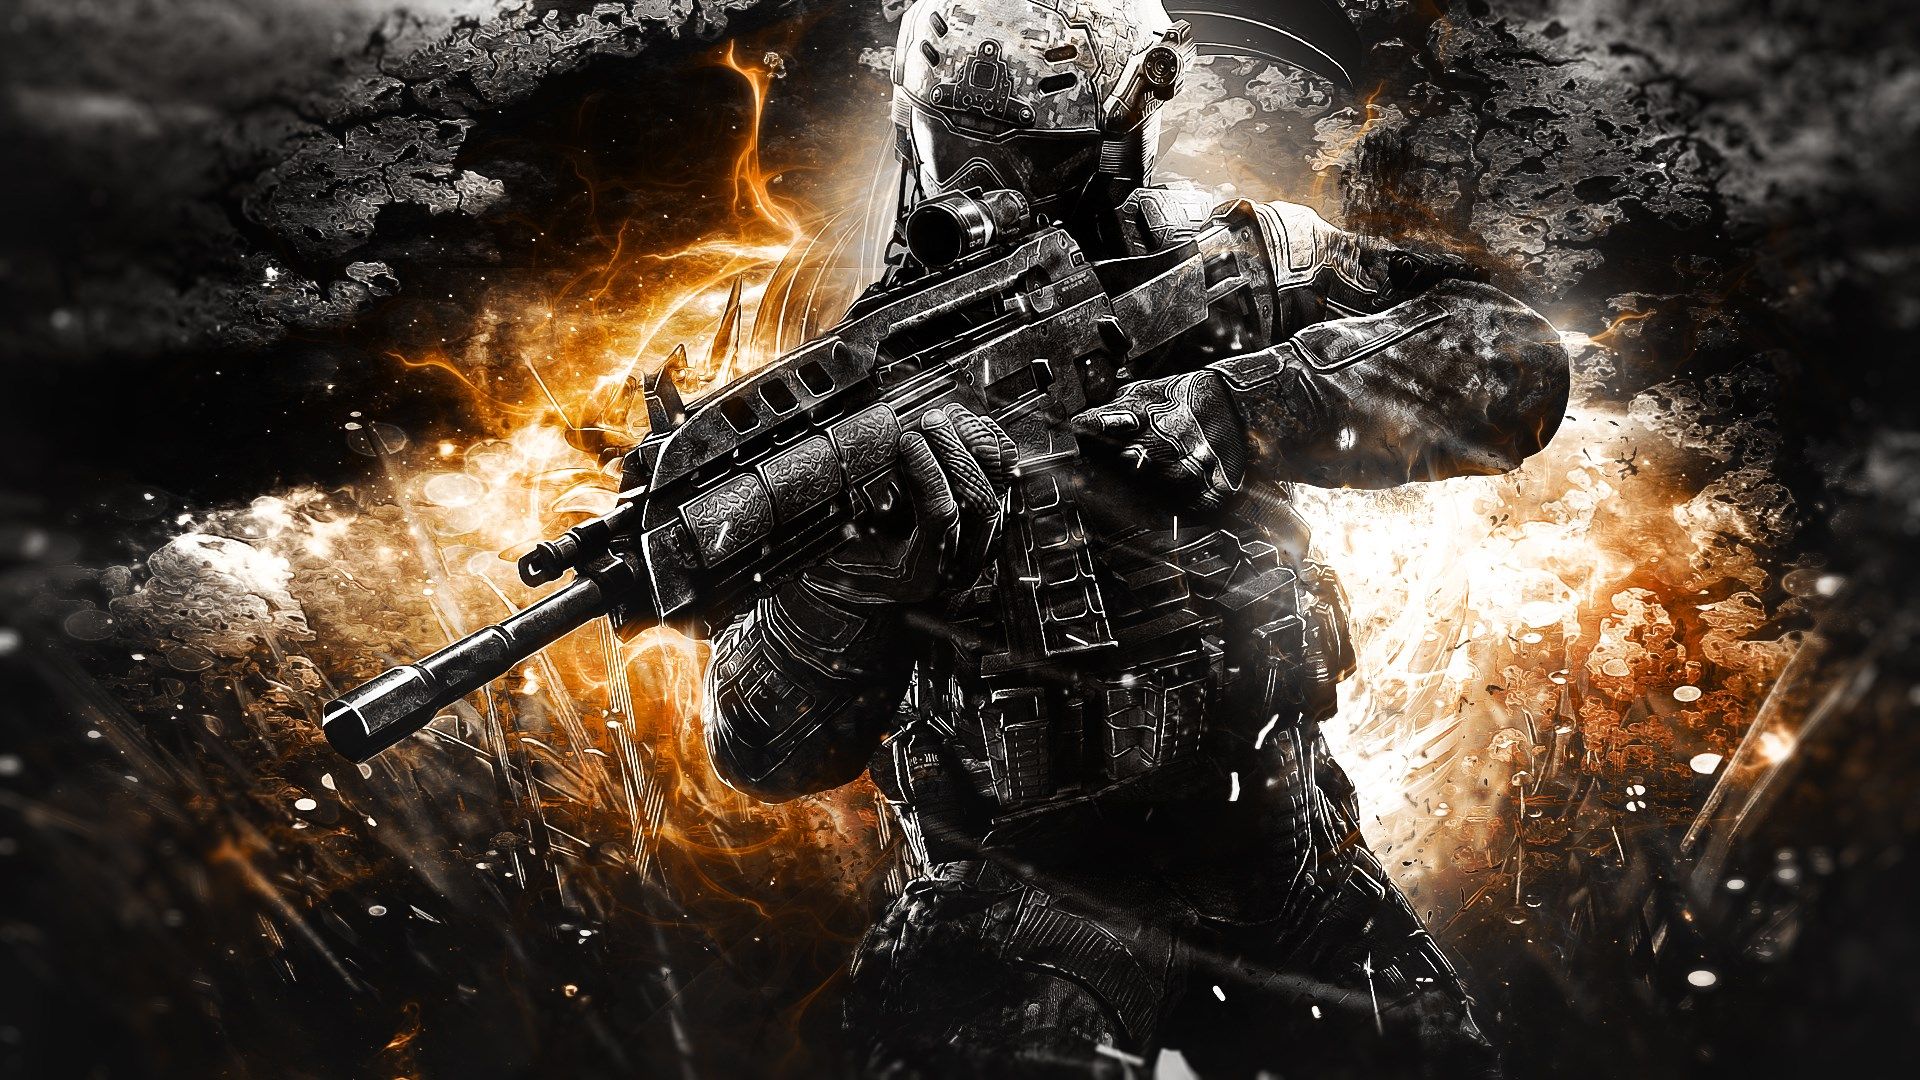 Call of Duty iPhone Wallpapers Top 25 Best Call of Duty iPhone Wallpapers   Getty Wallpapers